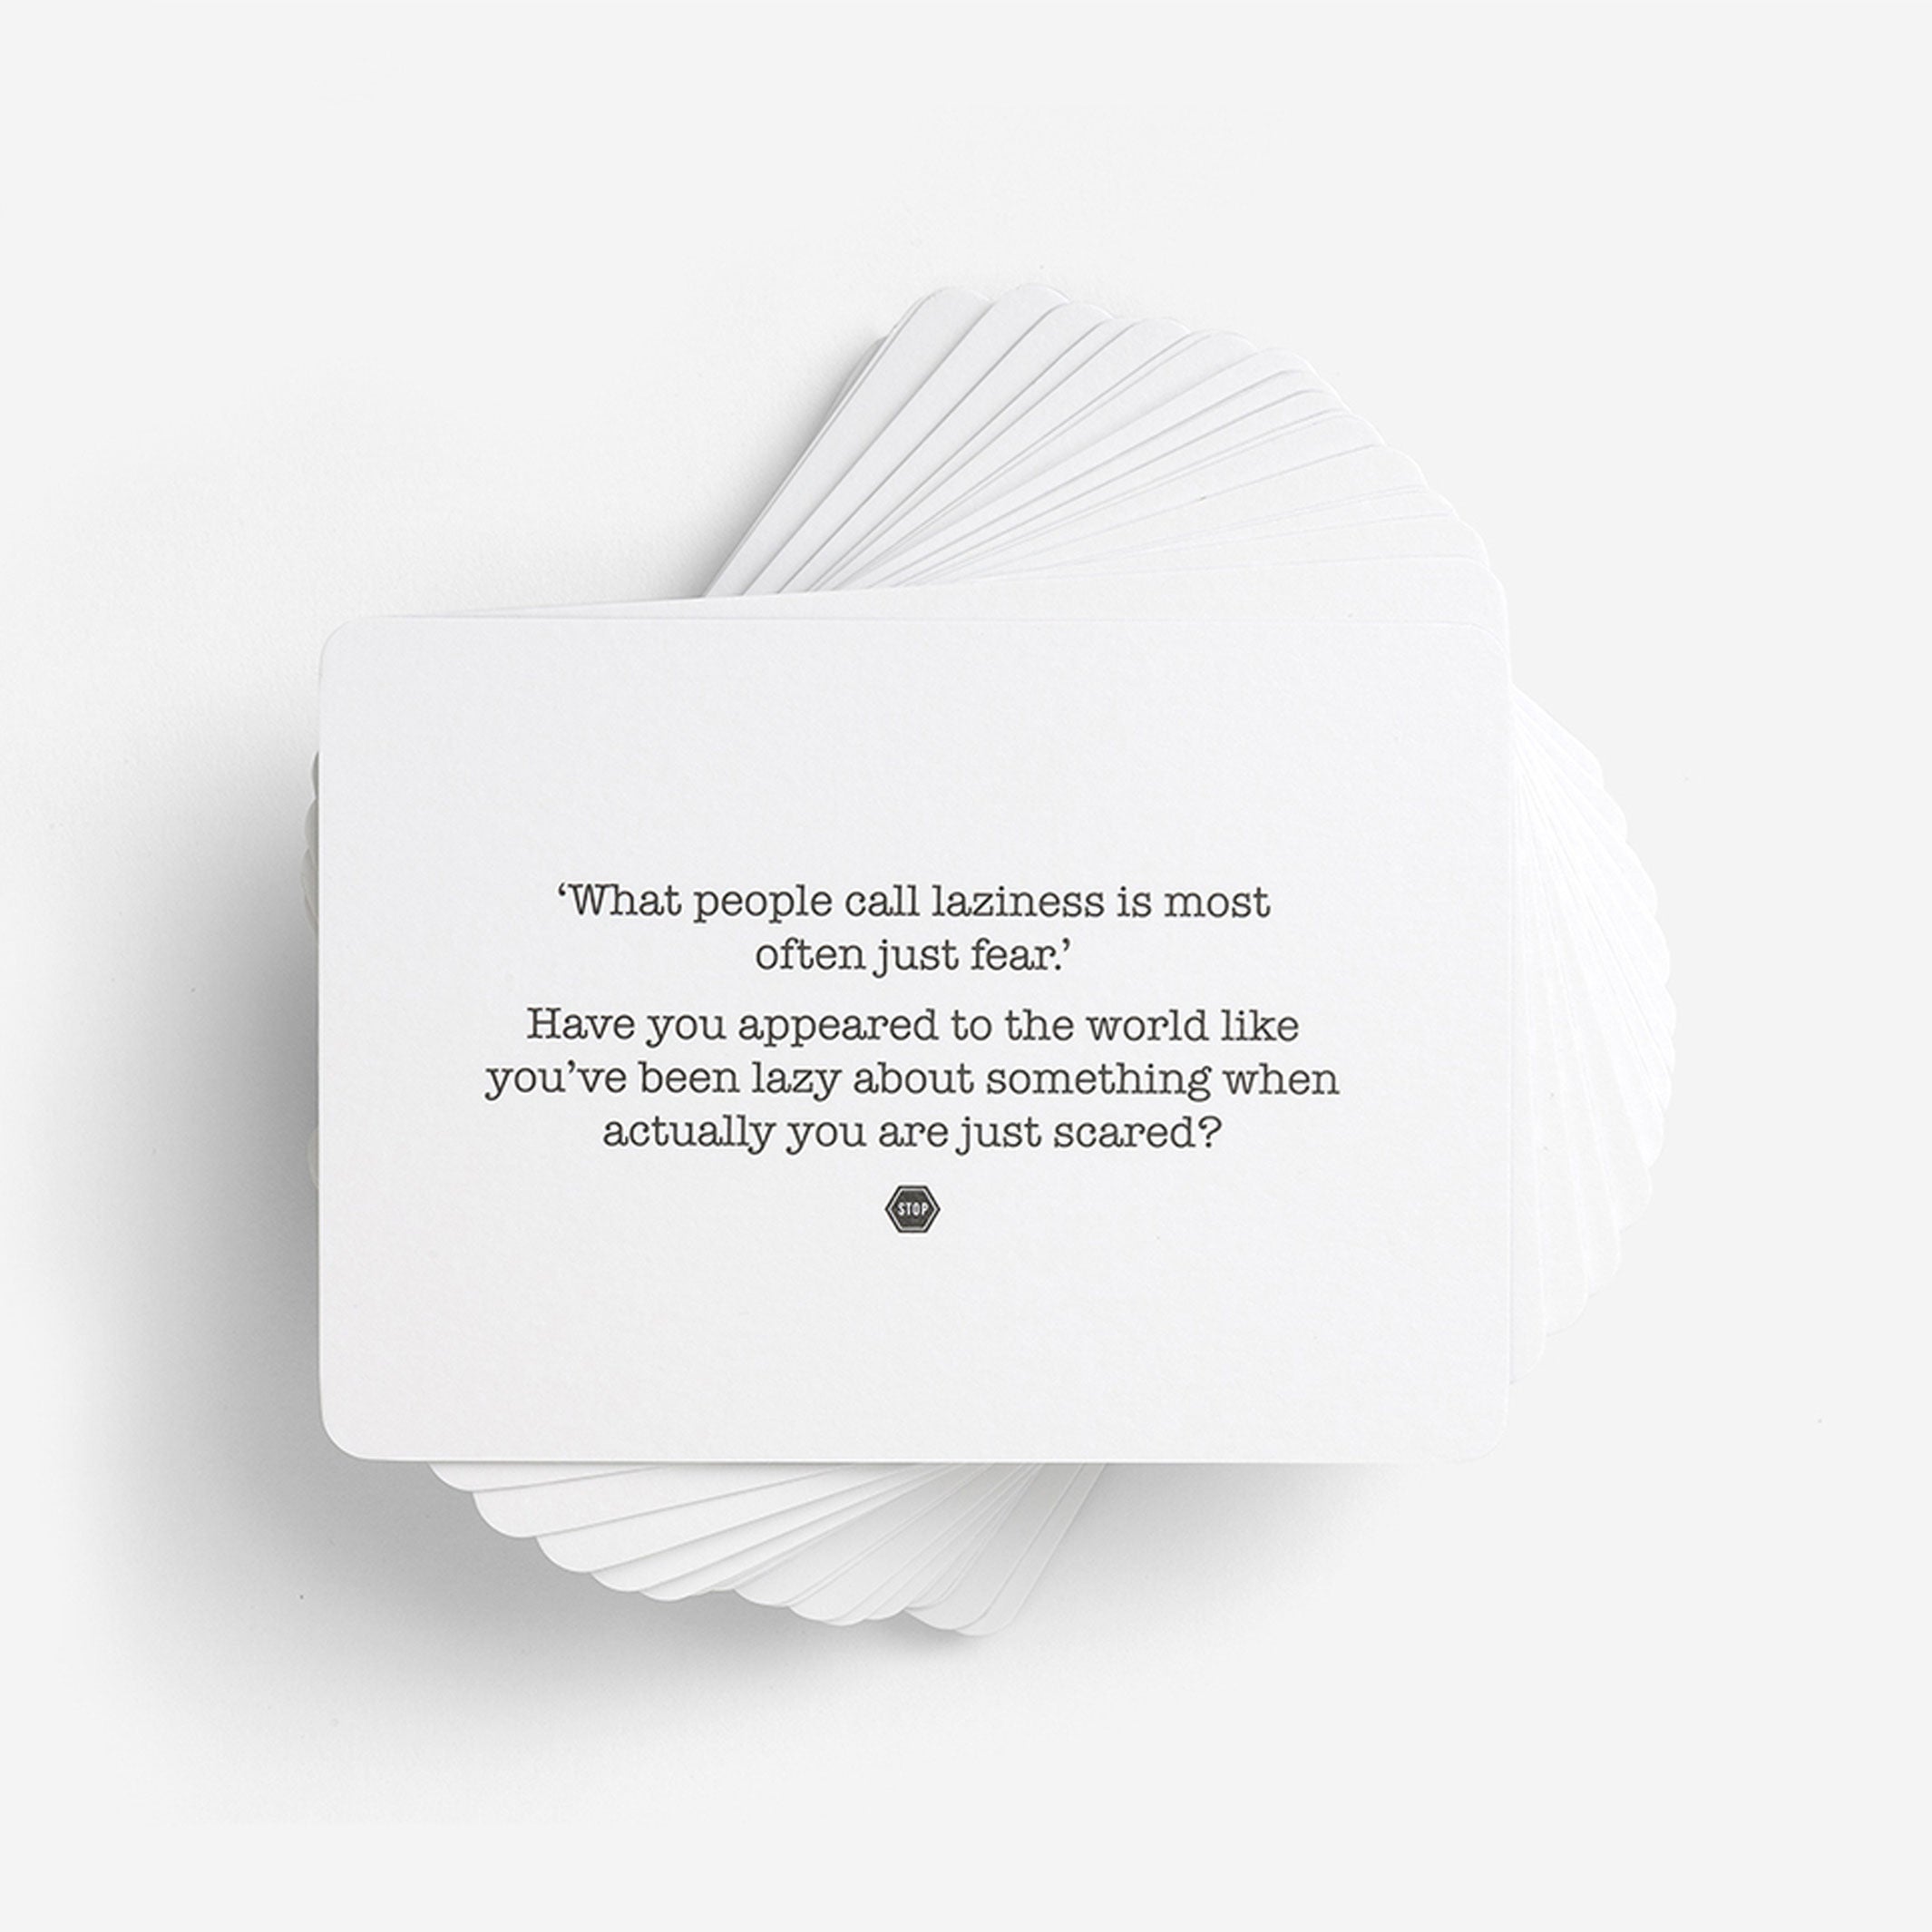 100 QUESTIONS WORK Edition | CARD GAME to spark meaningful conversations around work and careers | English | The School of Life